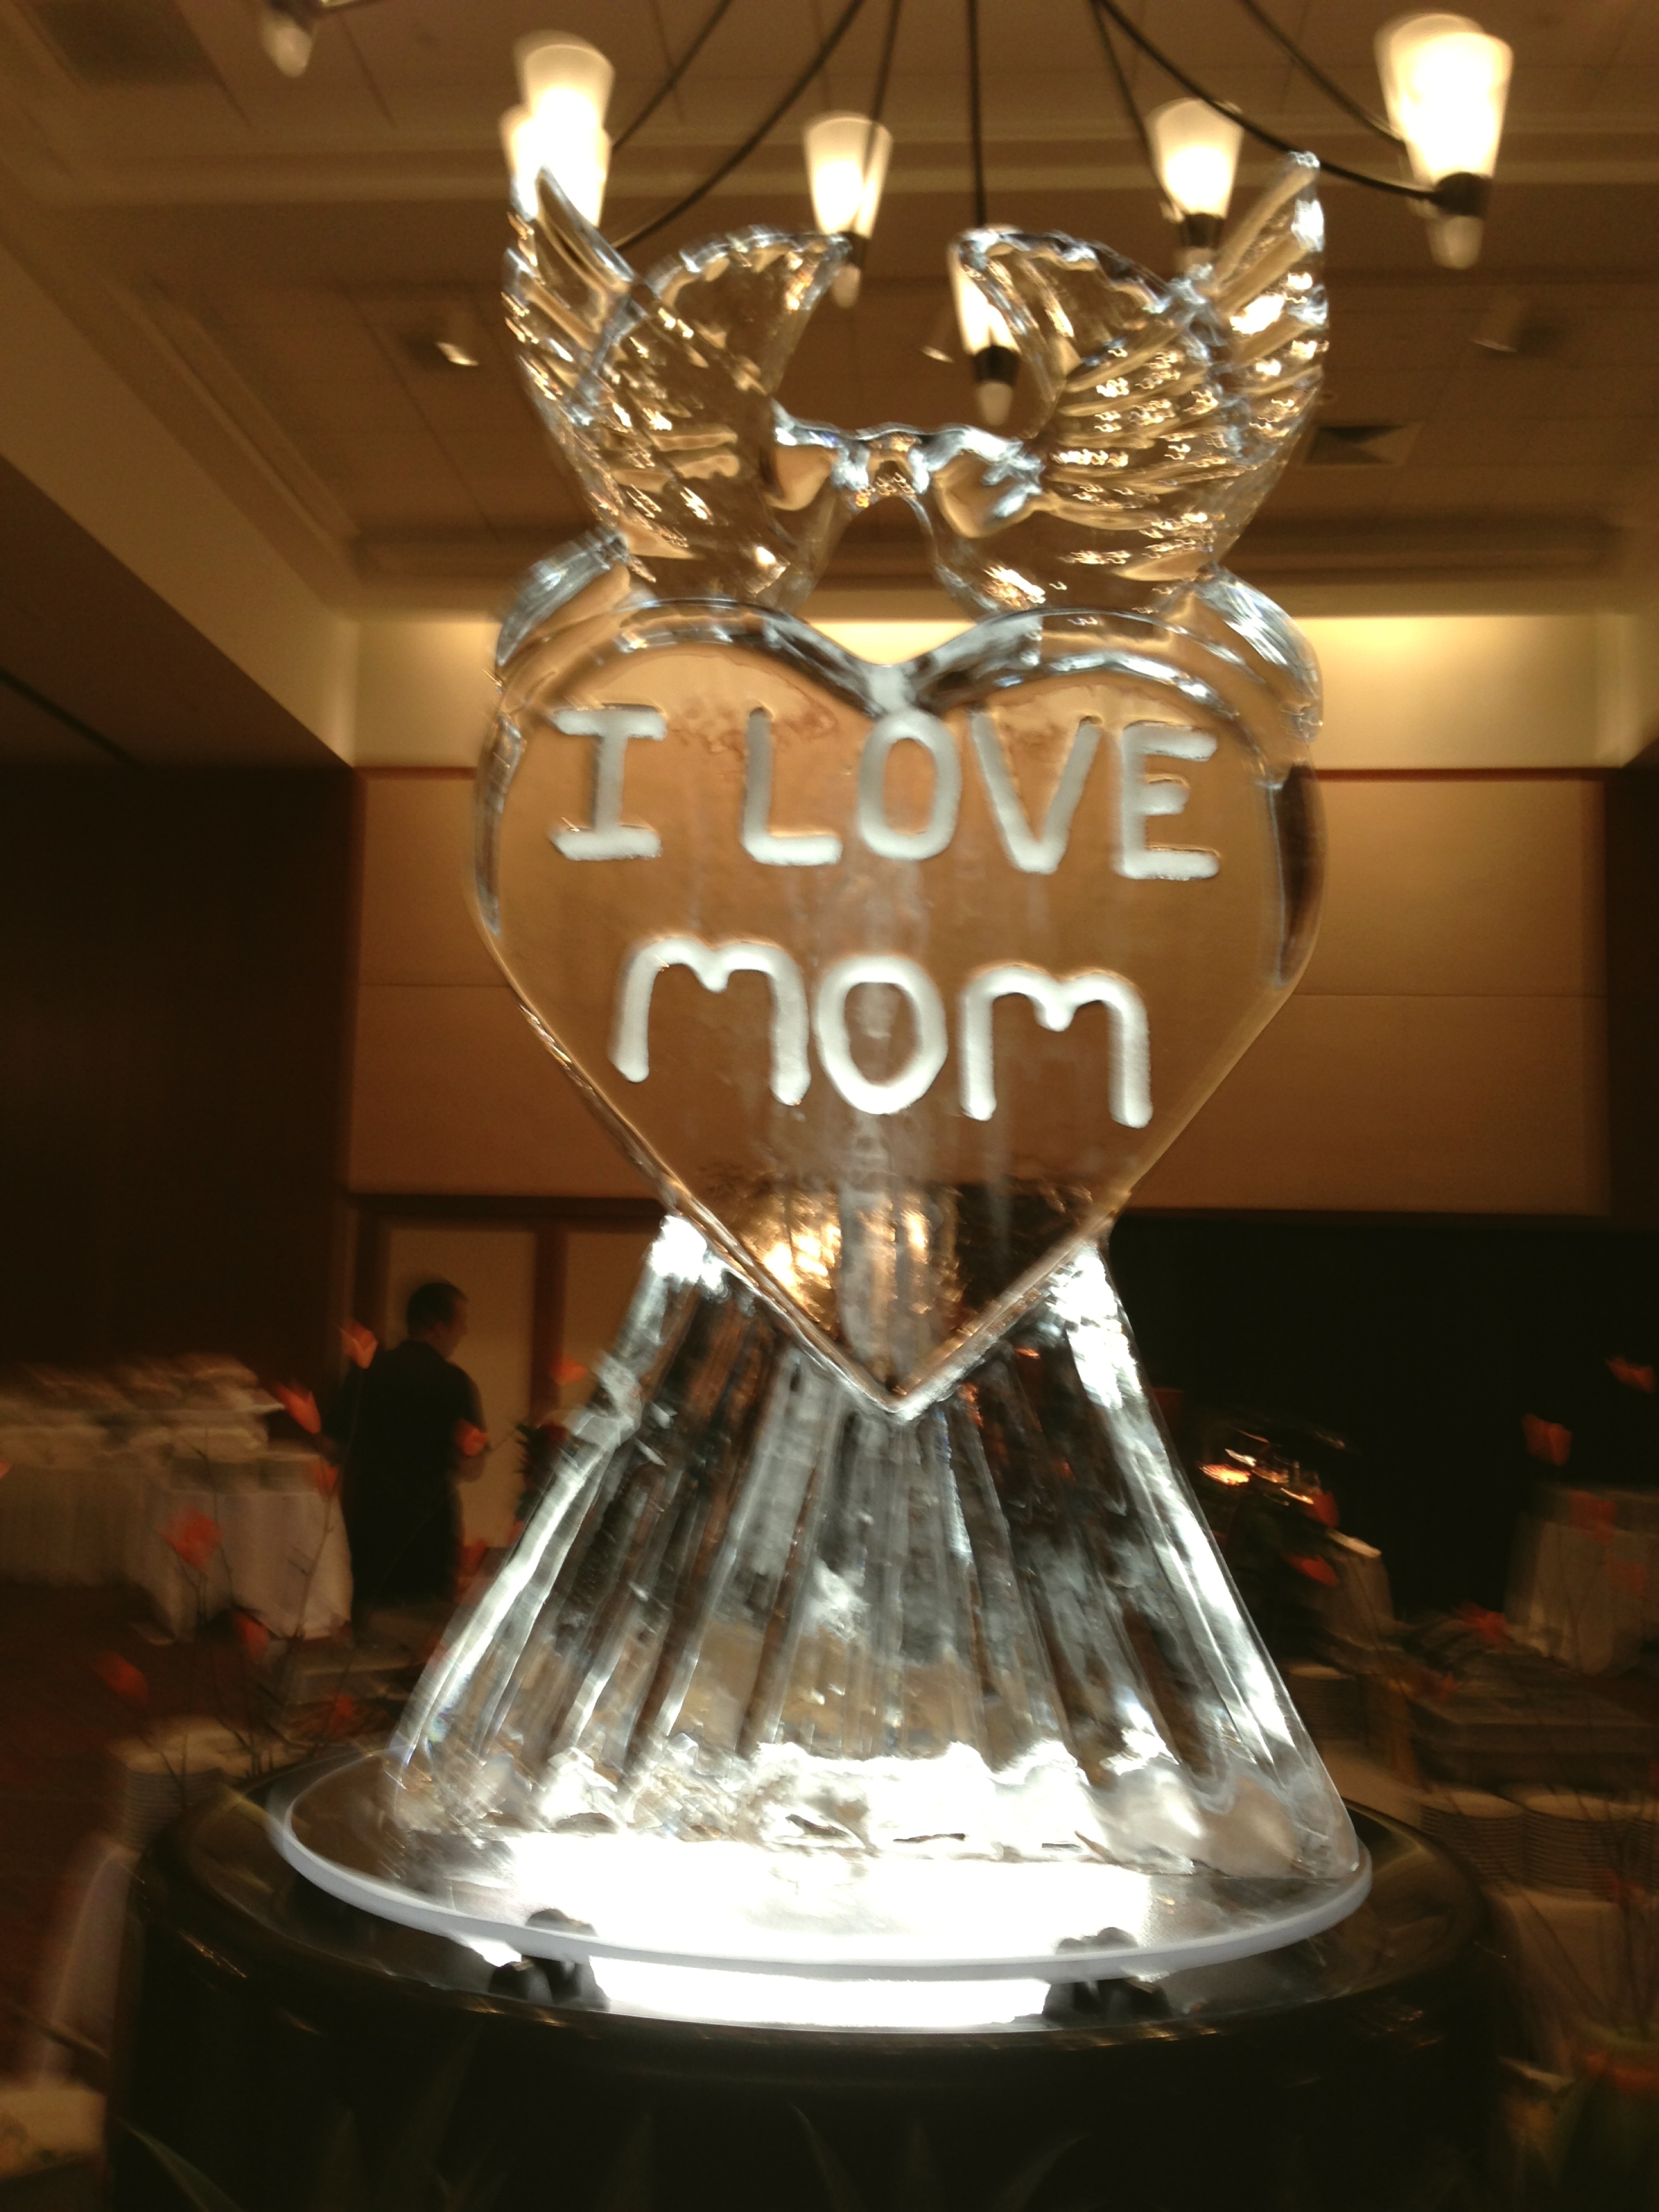 Happy Mothers day ice carving